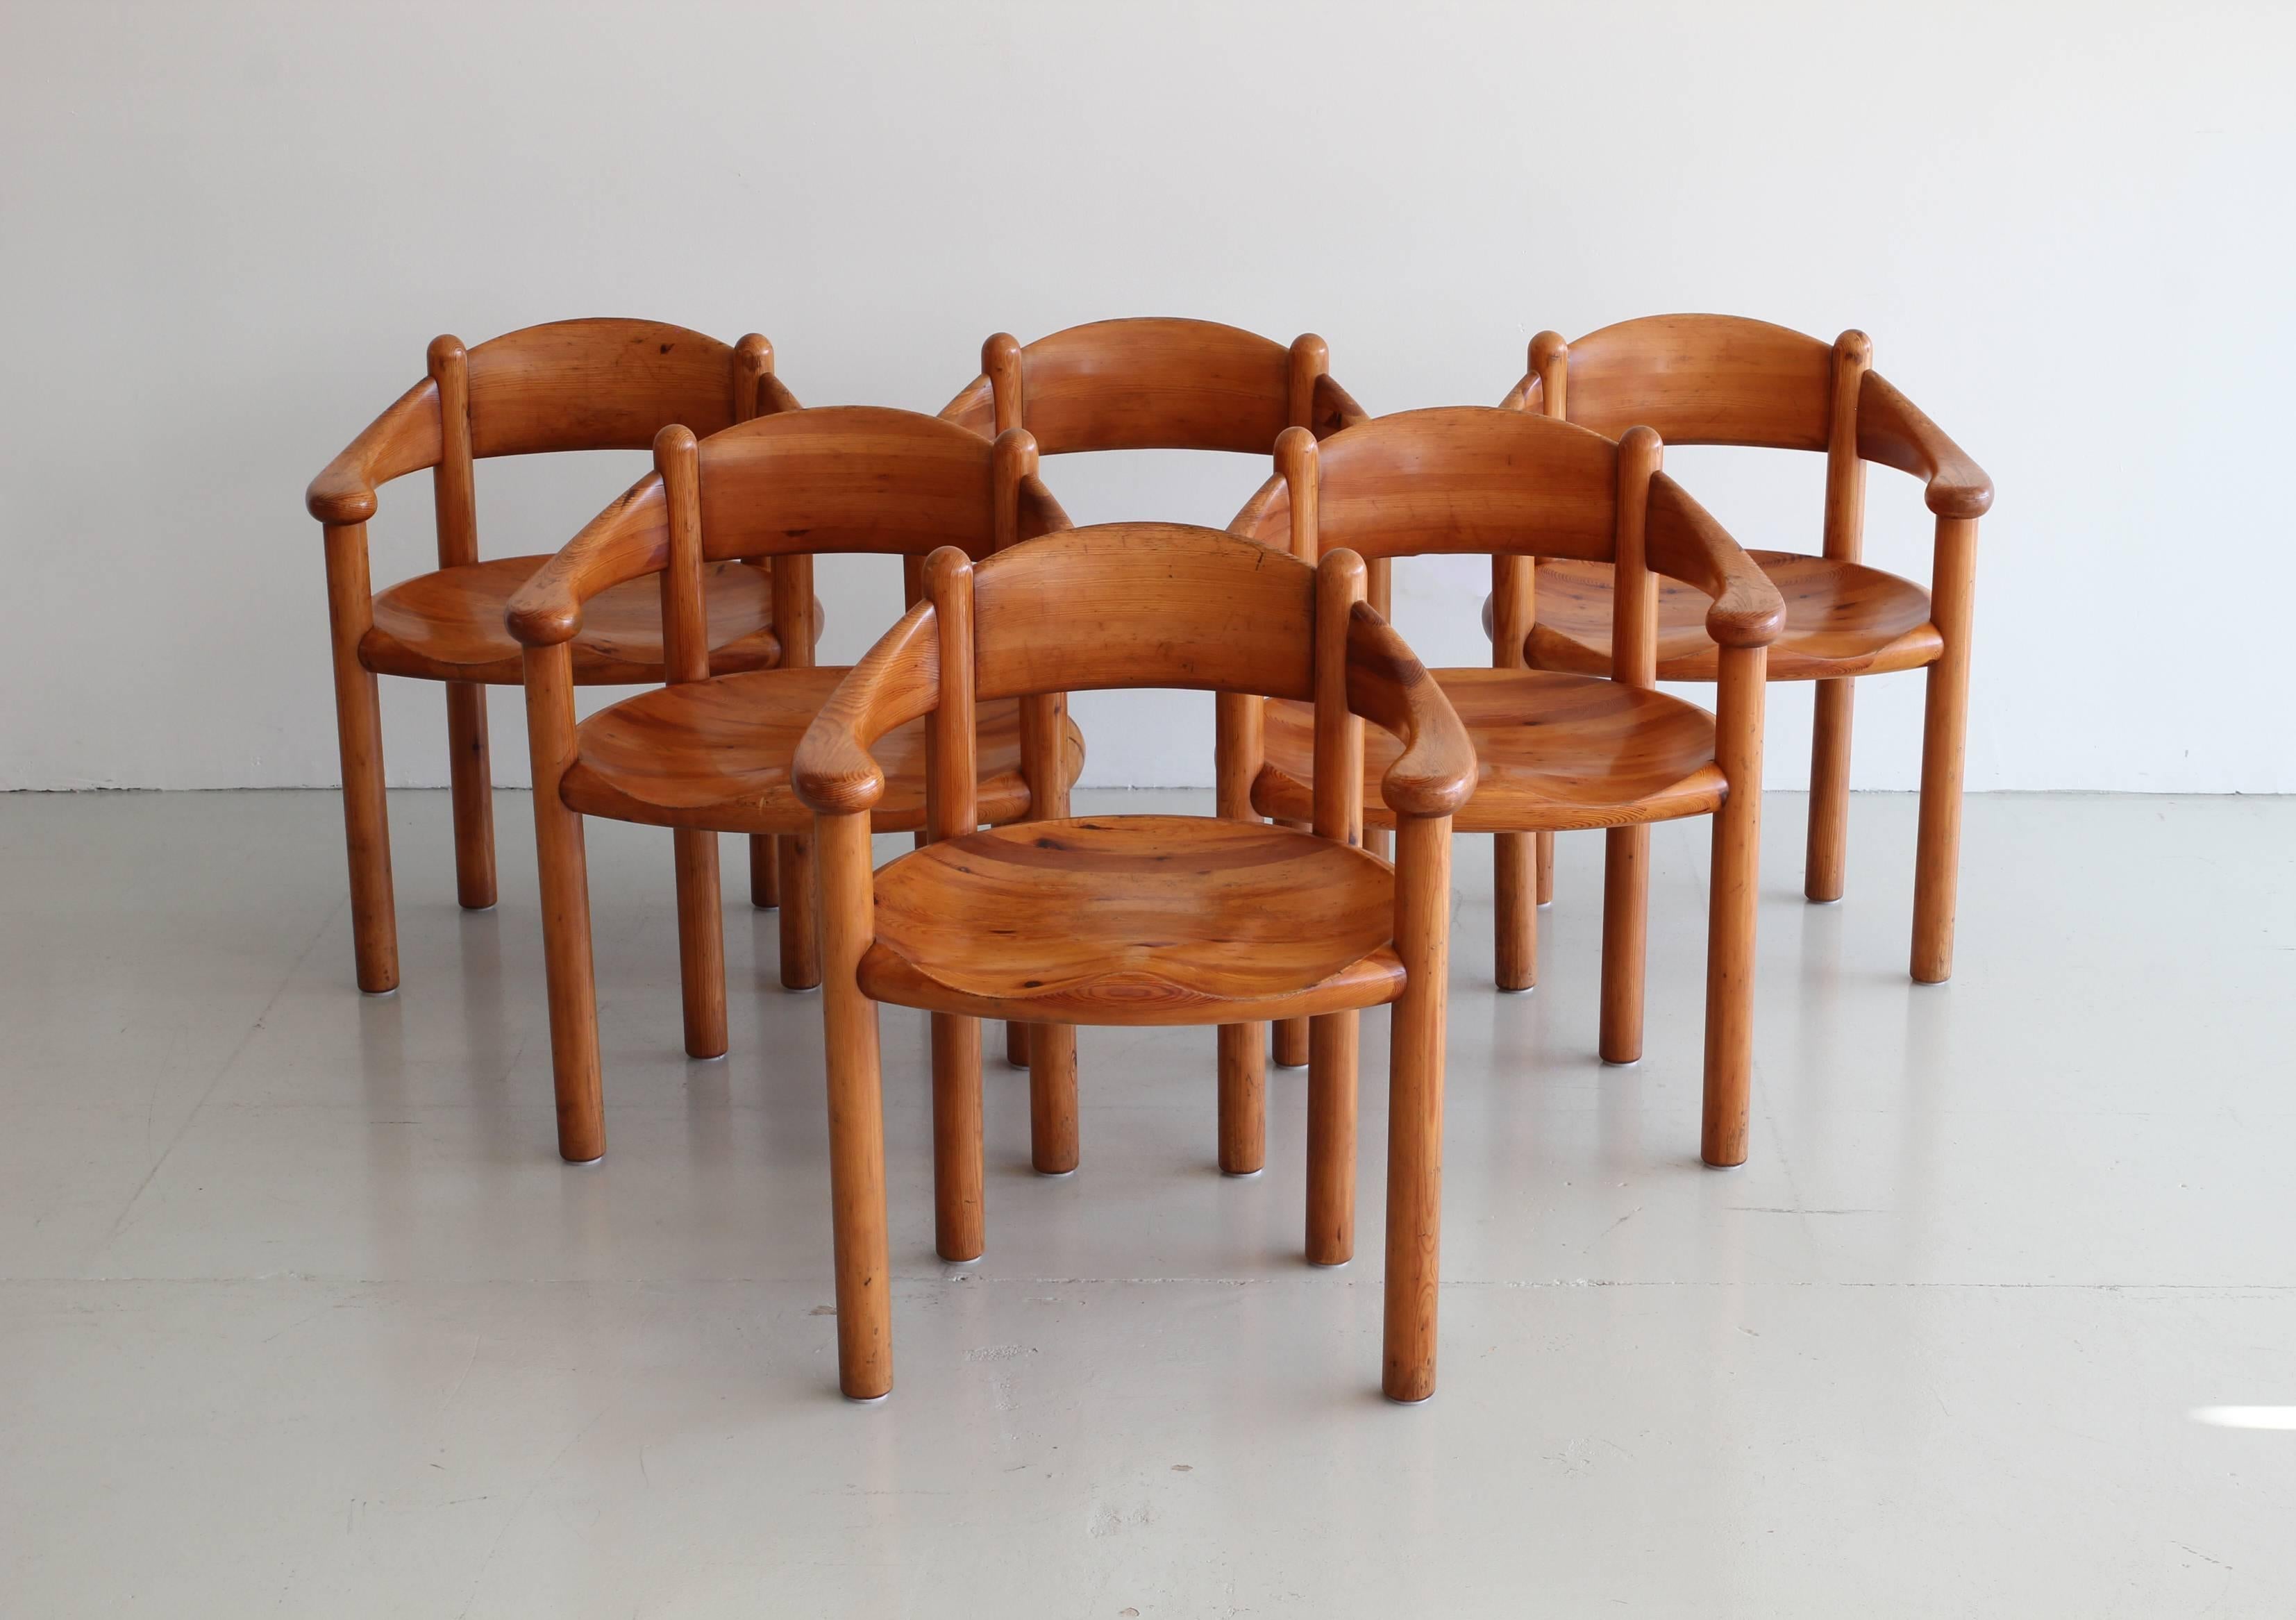 Rare Set of six sculptural armchairs by Swedish architect Rainer Daumiller. Fantastic sculptural shape and wonderful patina to the wood formed seats. Arm height: 24.5